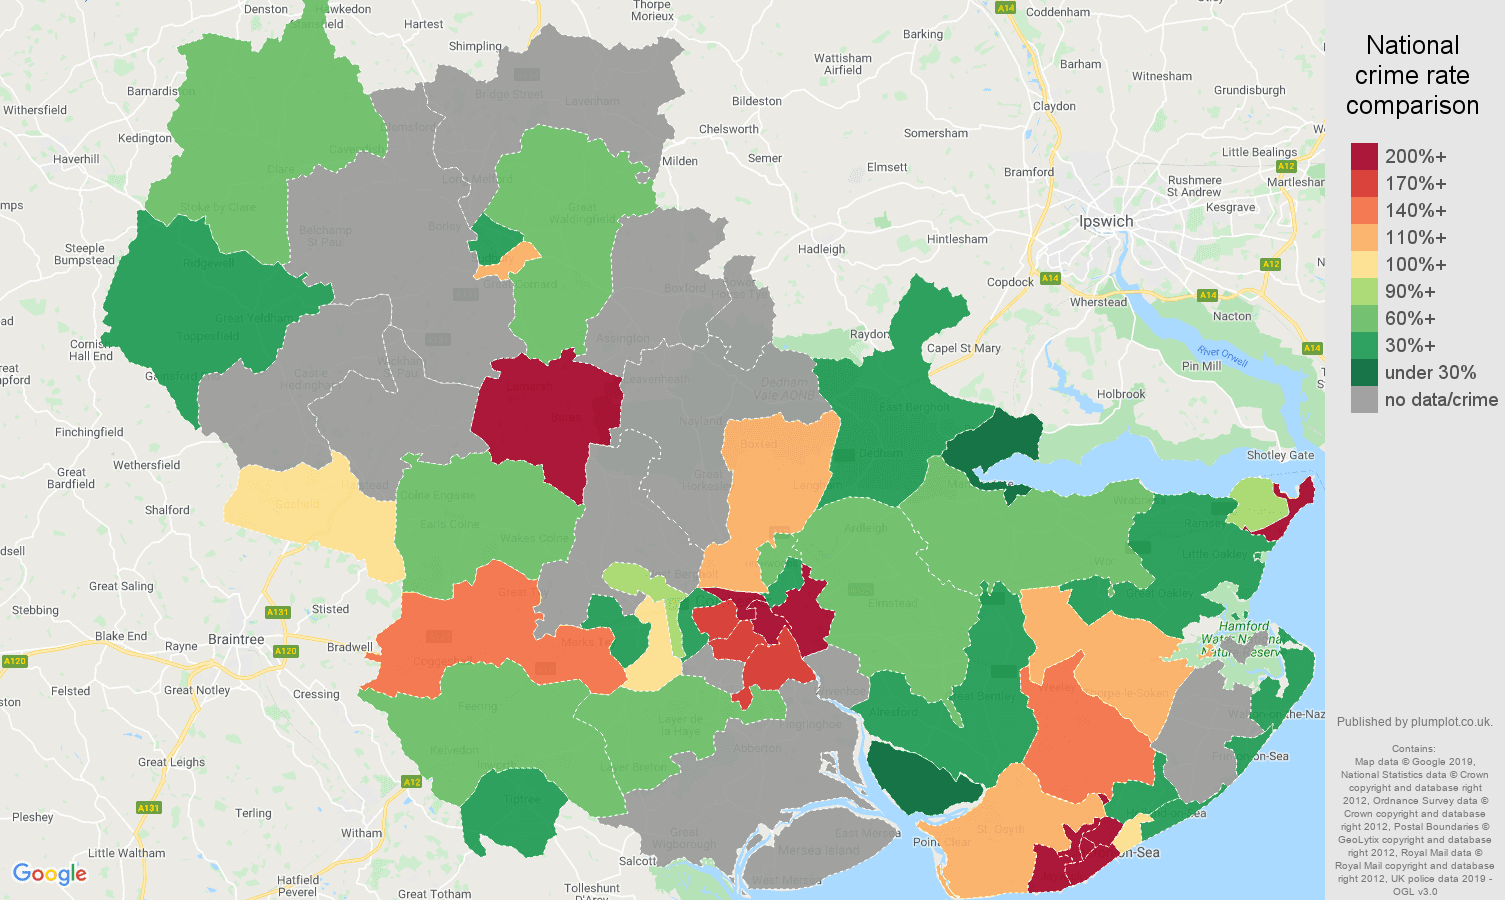 Colchester possession of weapons crime rate comparison map